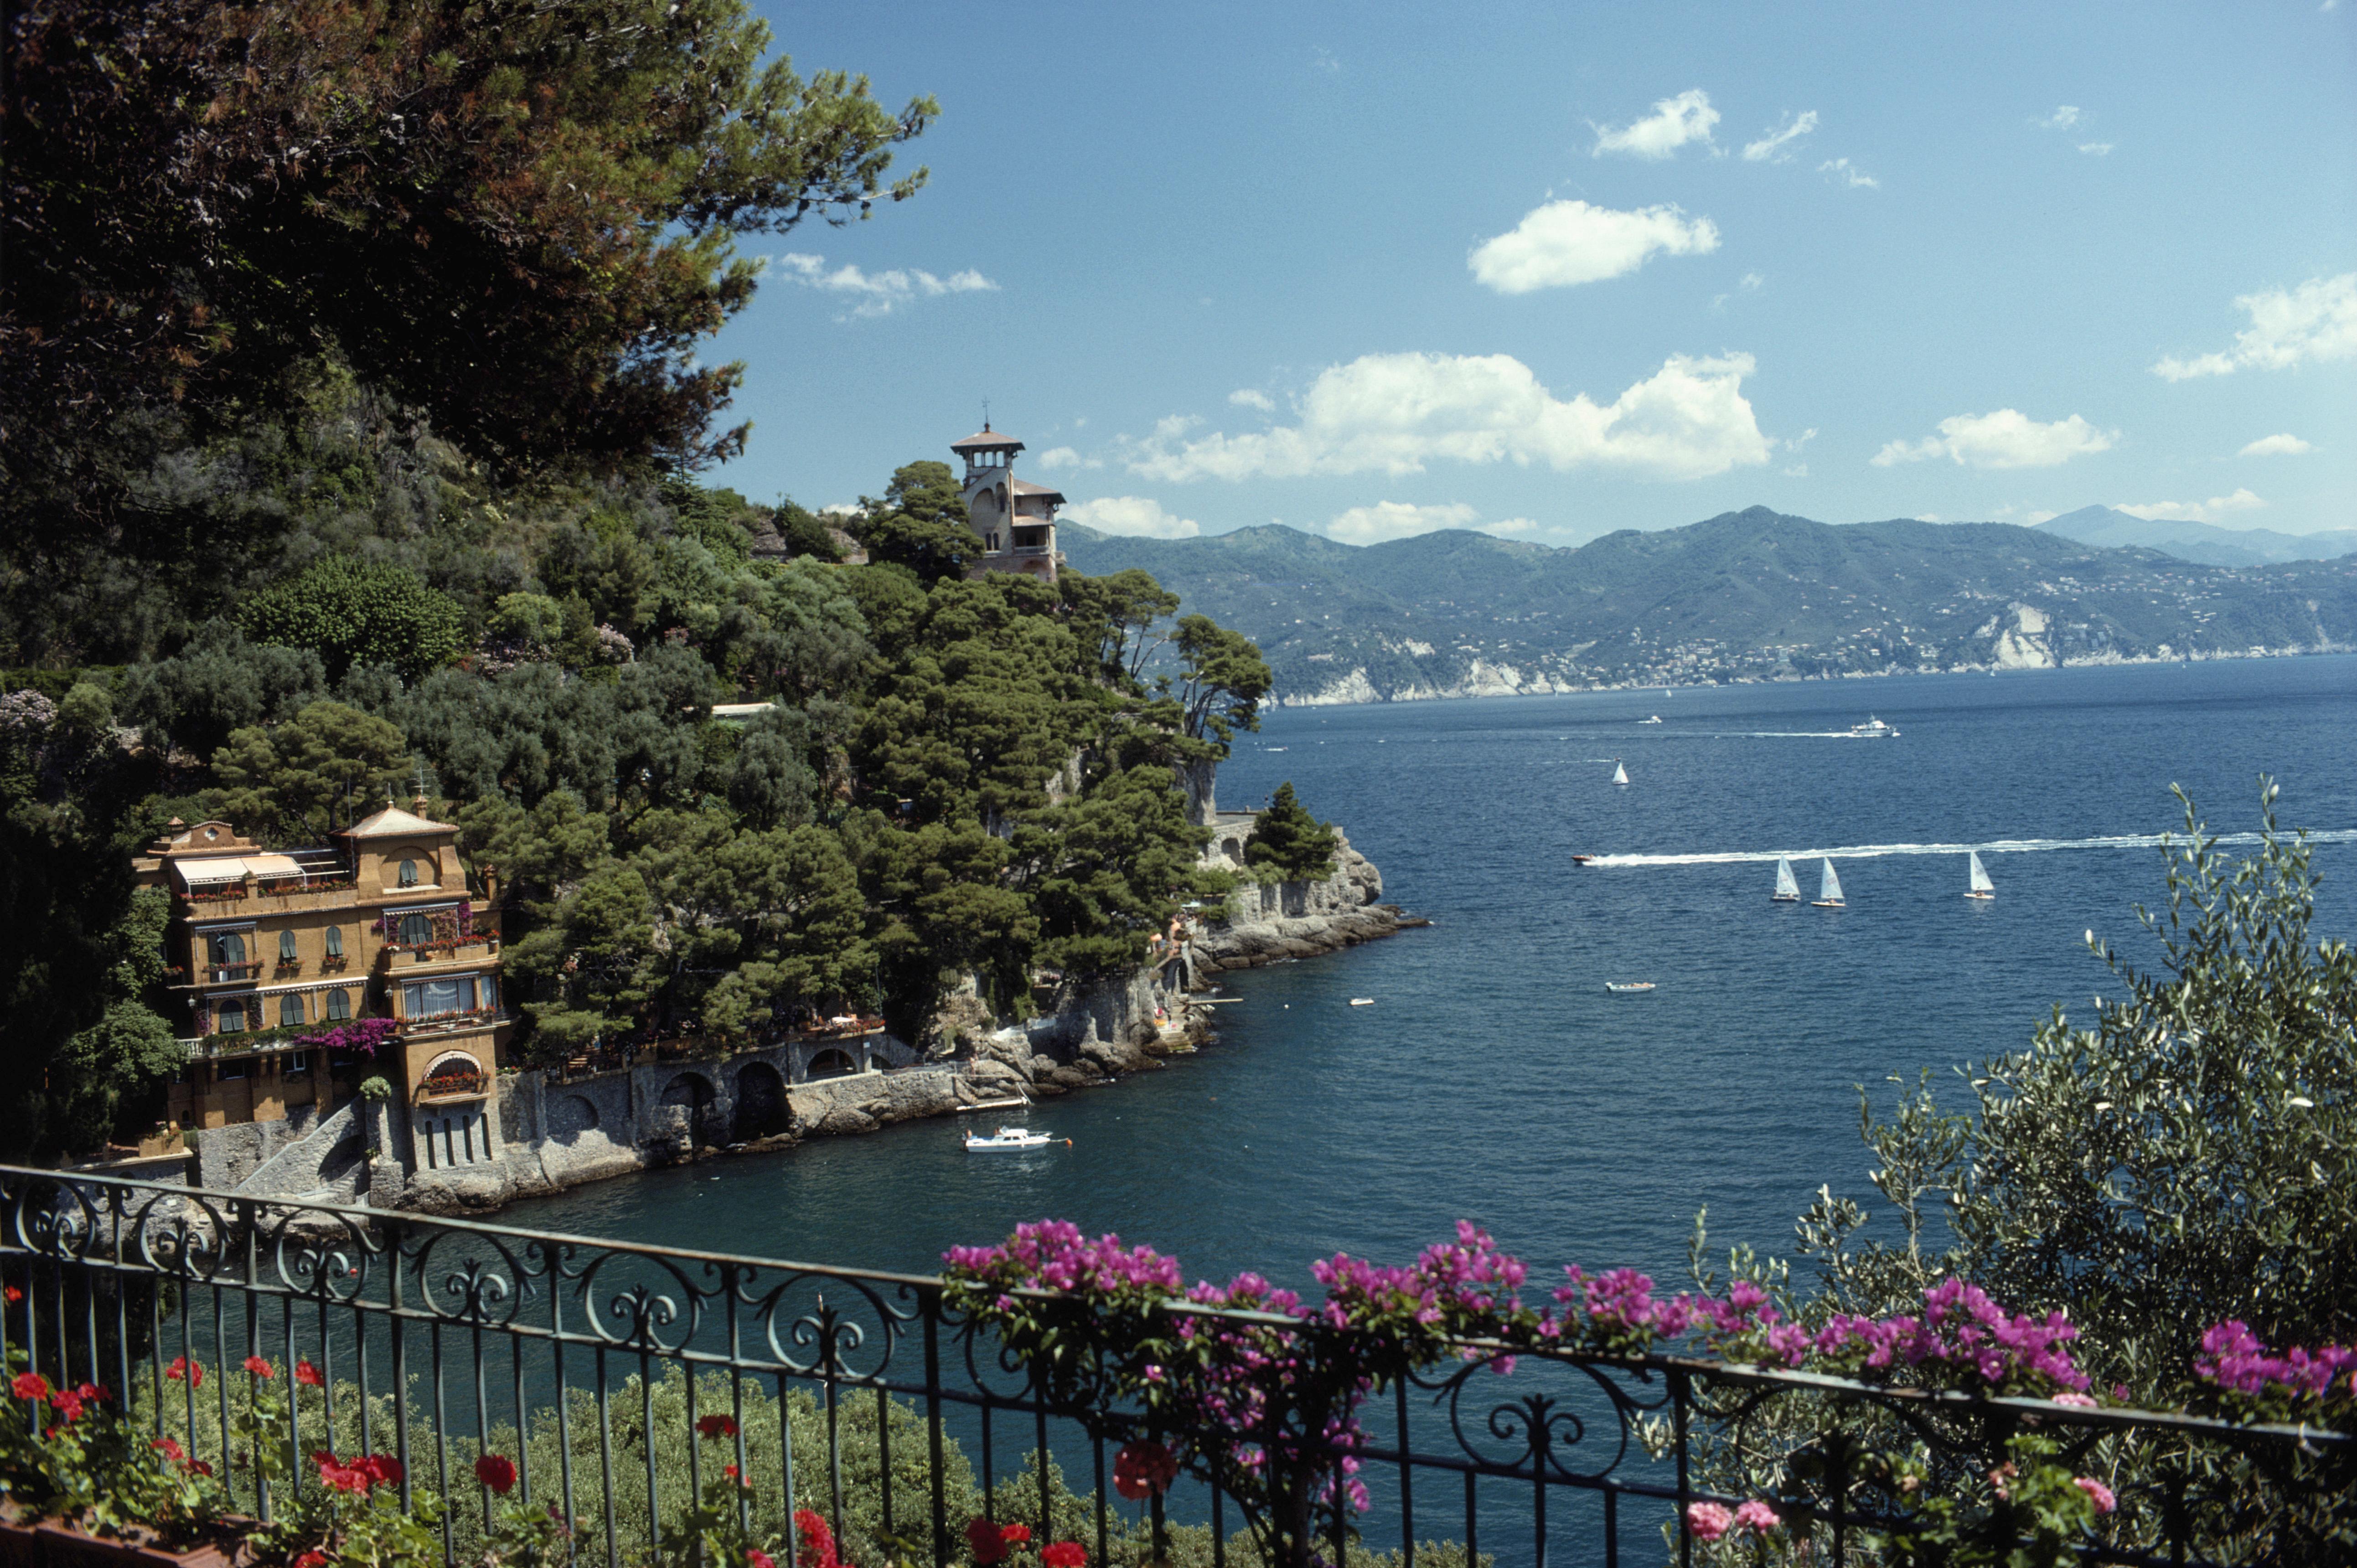 Slim Aarons
Ardissones House, Portofino
1977
C print
Estate stamped and hand numbered edition of 150 with certificate of authenticity from the estate.   

Overlooking Ardissones House, on the water's edge in Portofino, Italy, 1977. (Photo by Slim